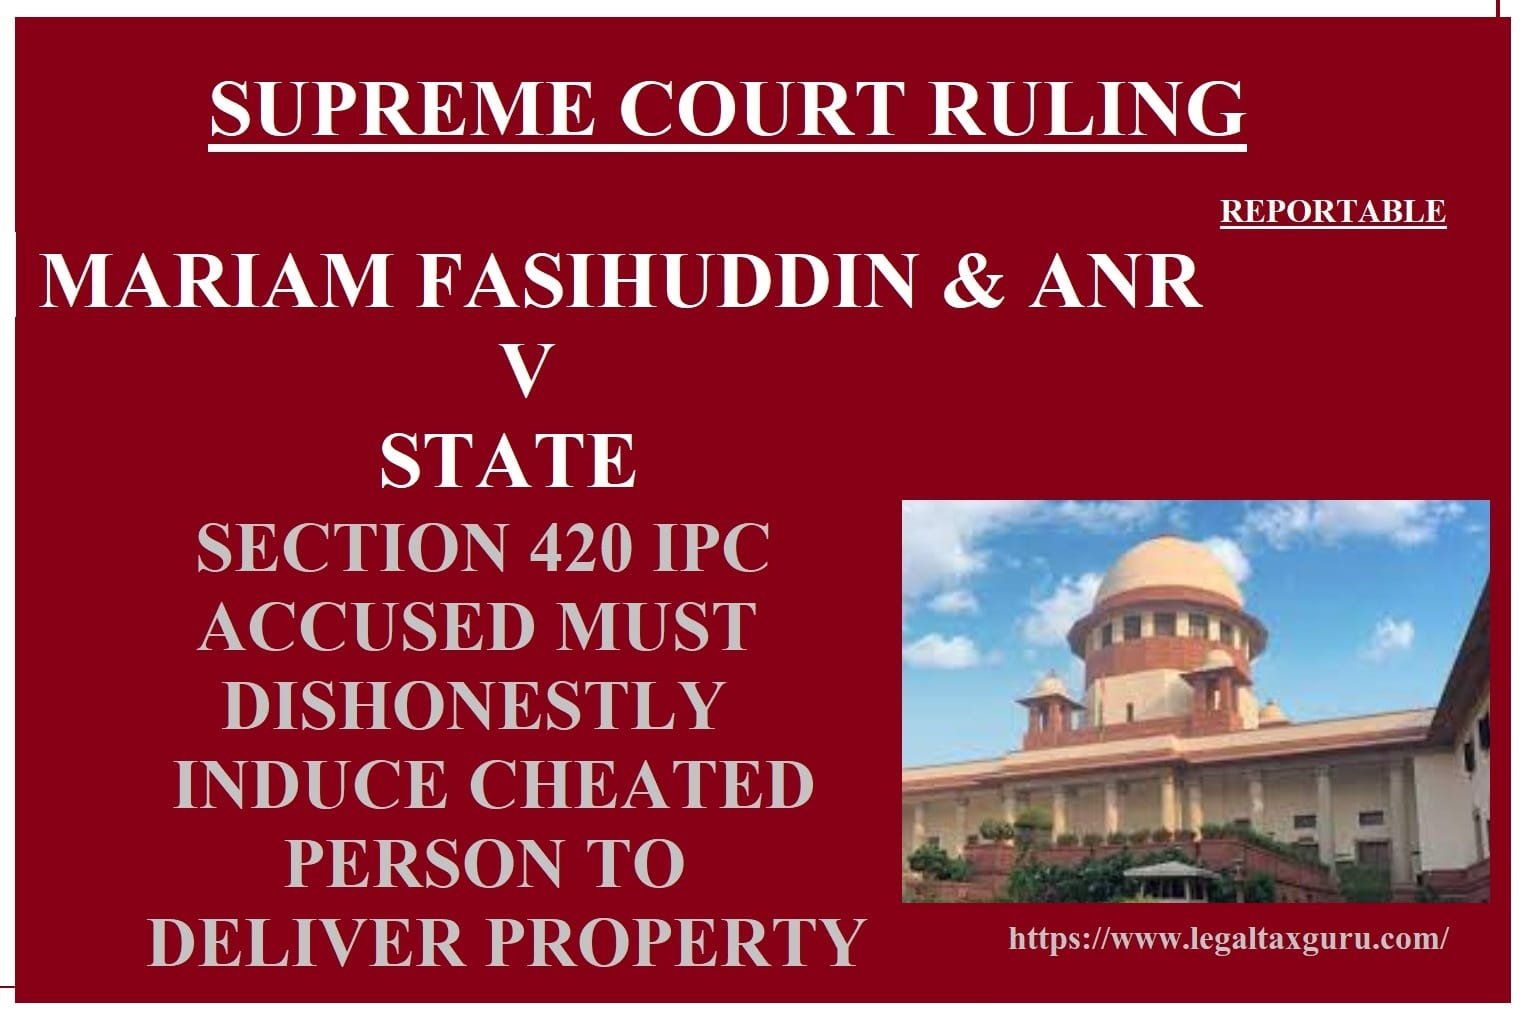 SUPREME COURT RULING: SECTION 420 IPC ACCUSED MUST DISHONESTLY